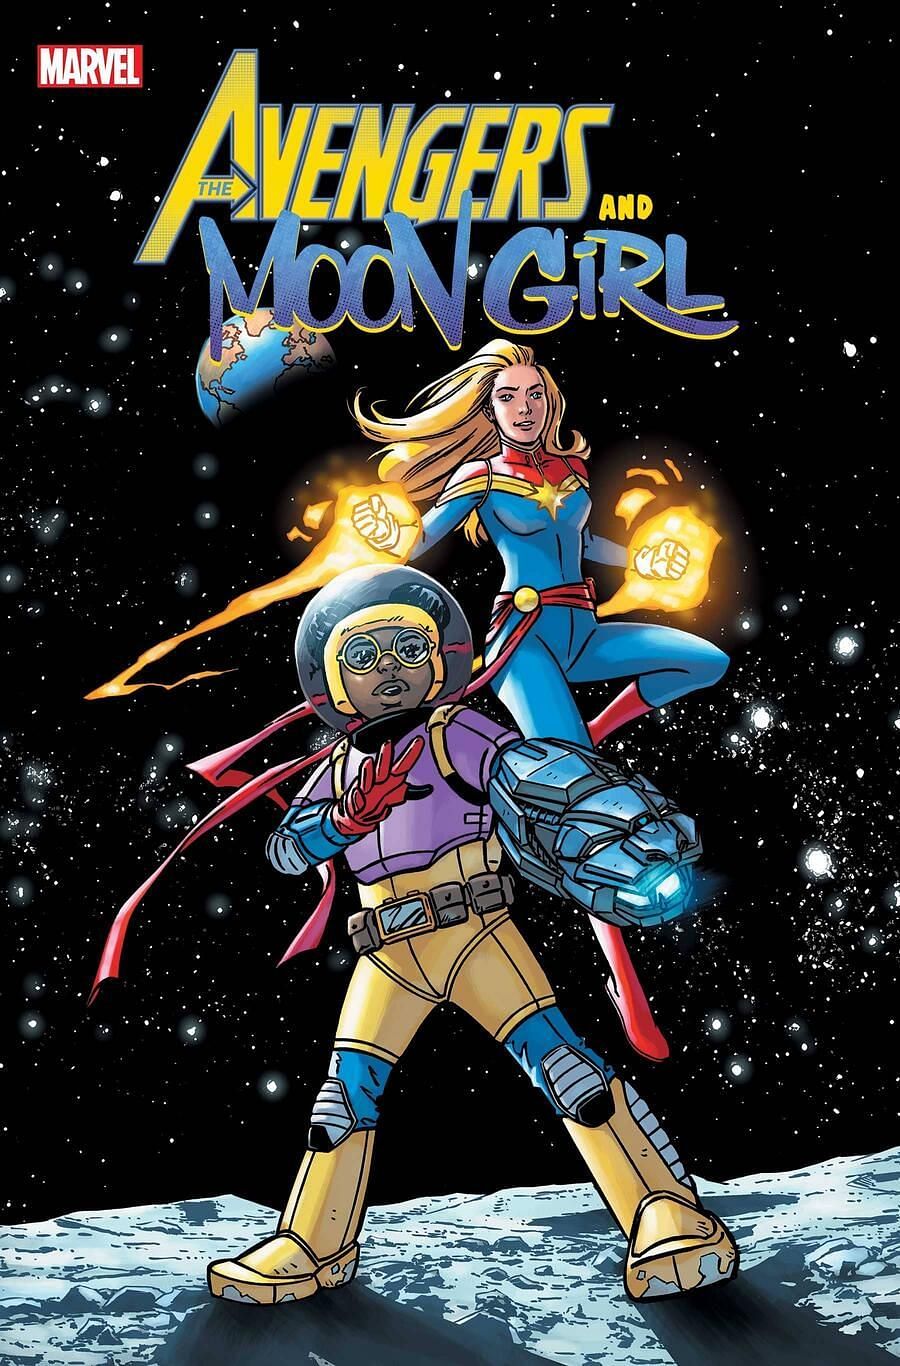 Avengers and Moon Girl #1 releases in July (Image via Marvel)